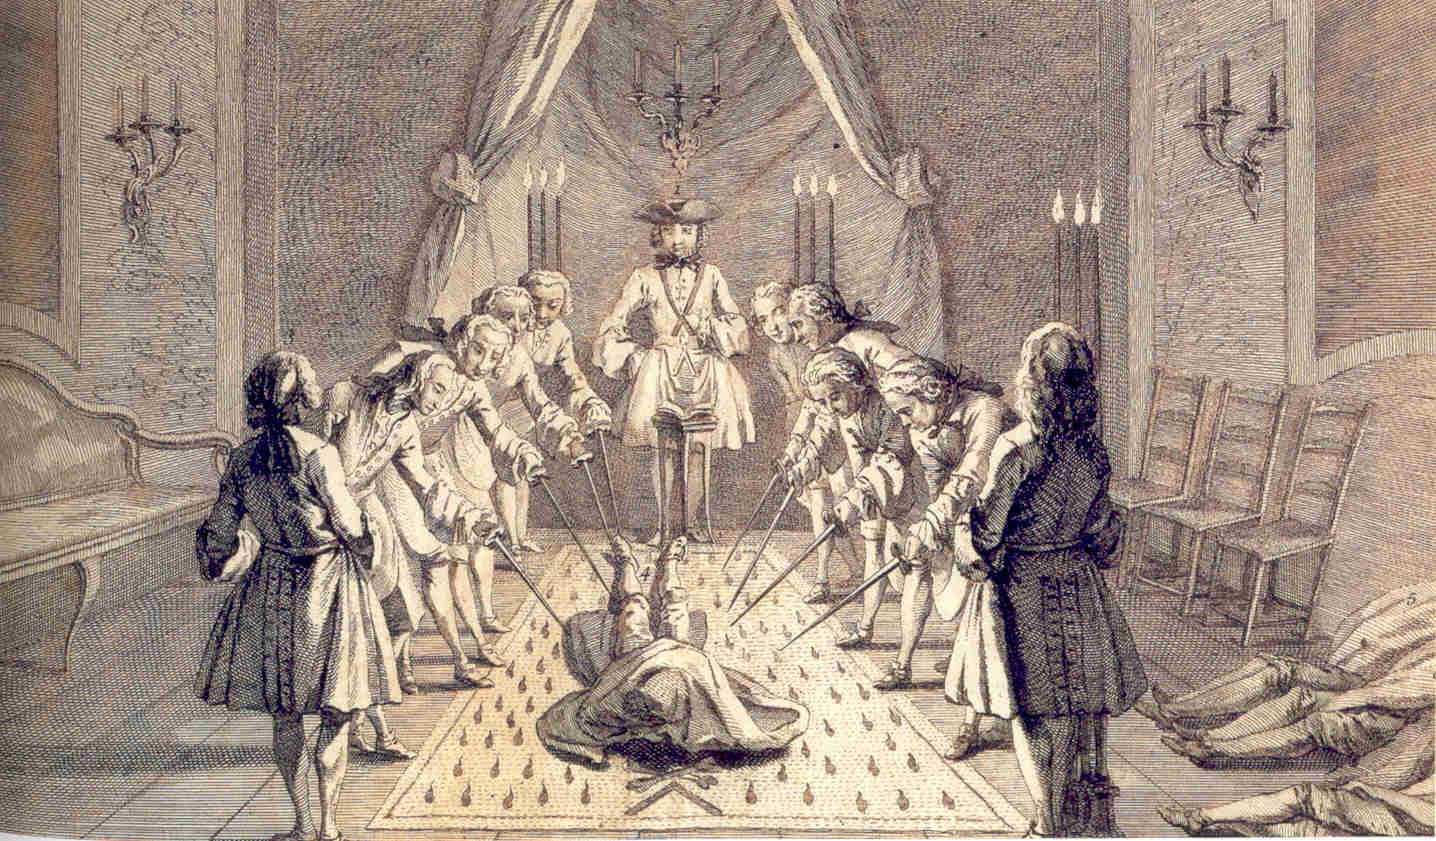 Second part of the initiation into the third degree